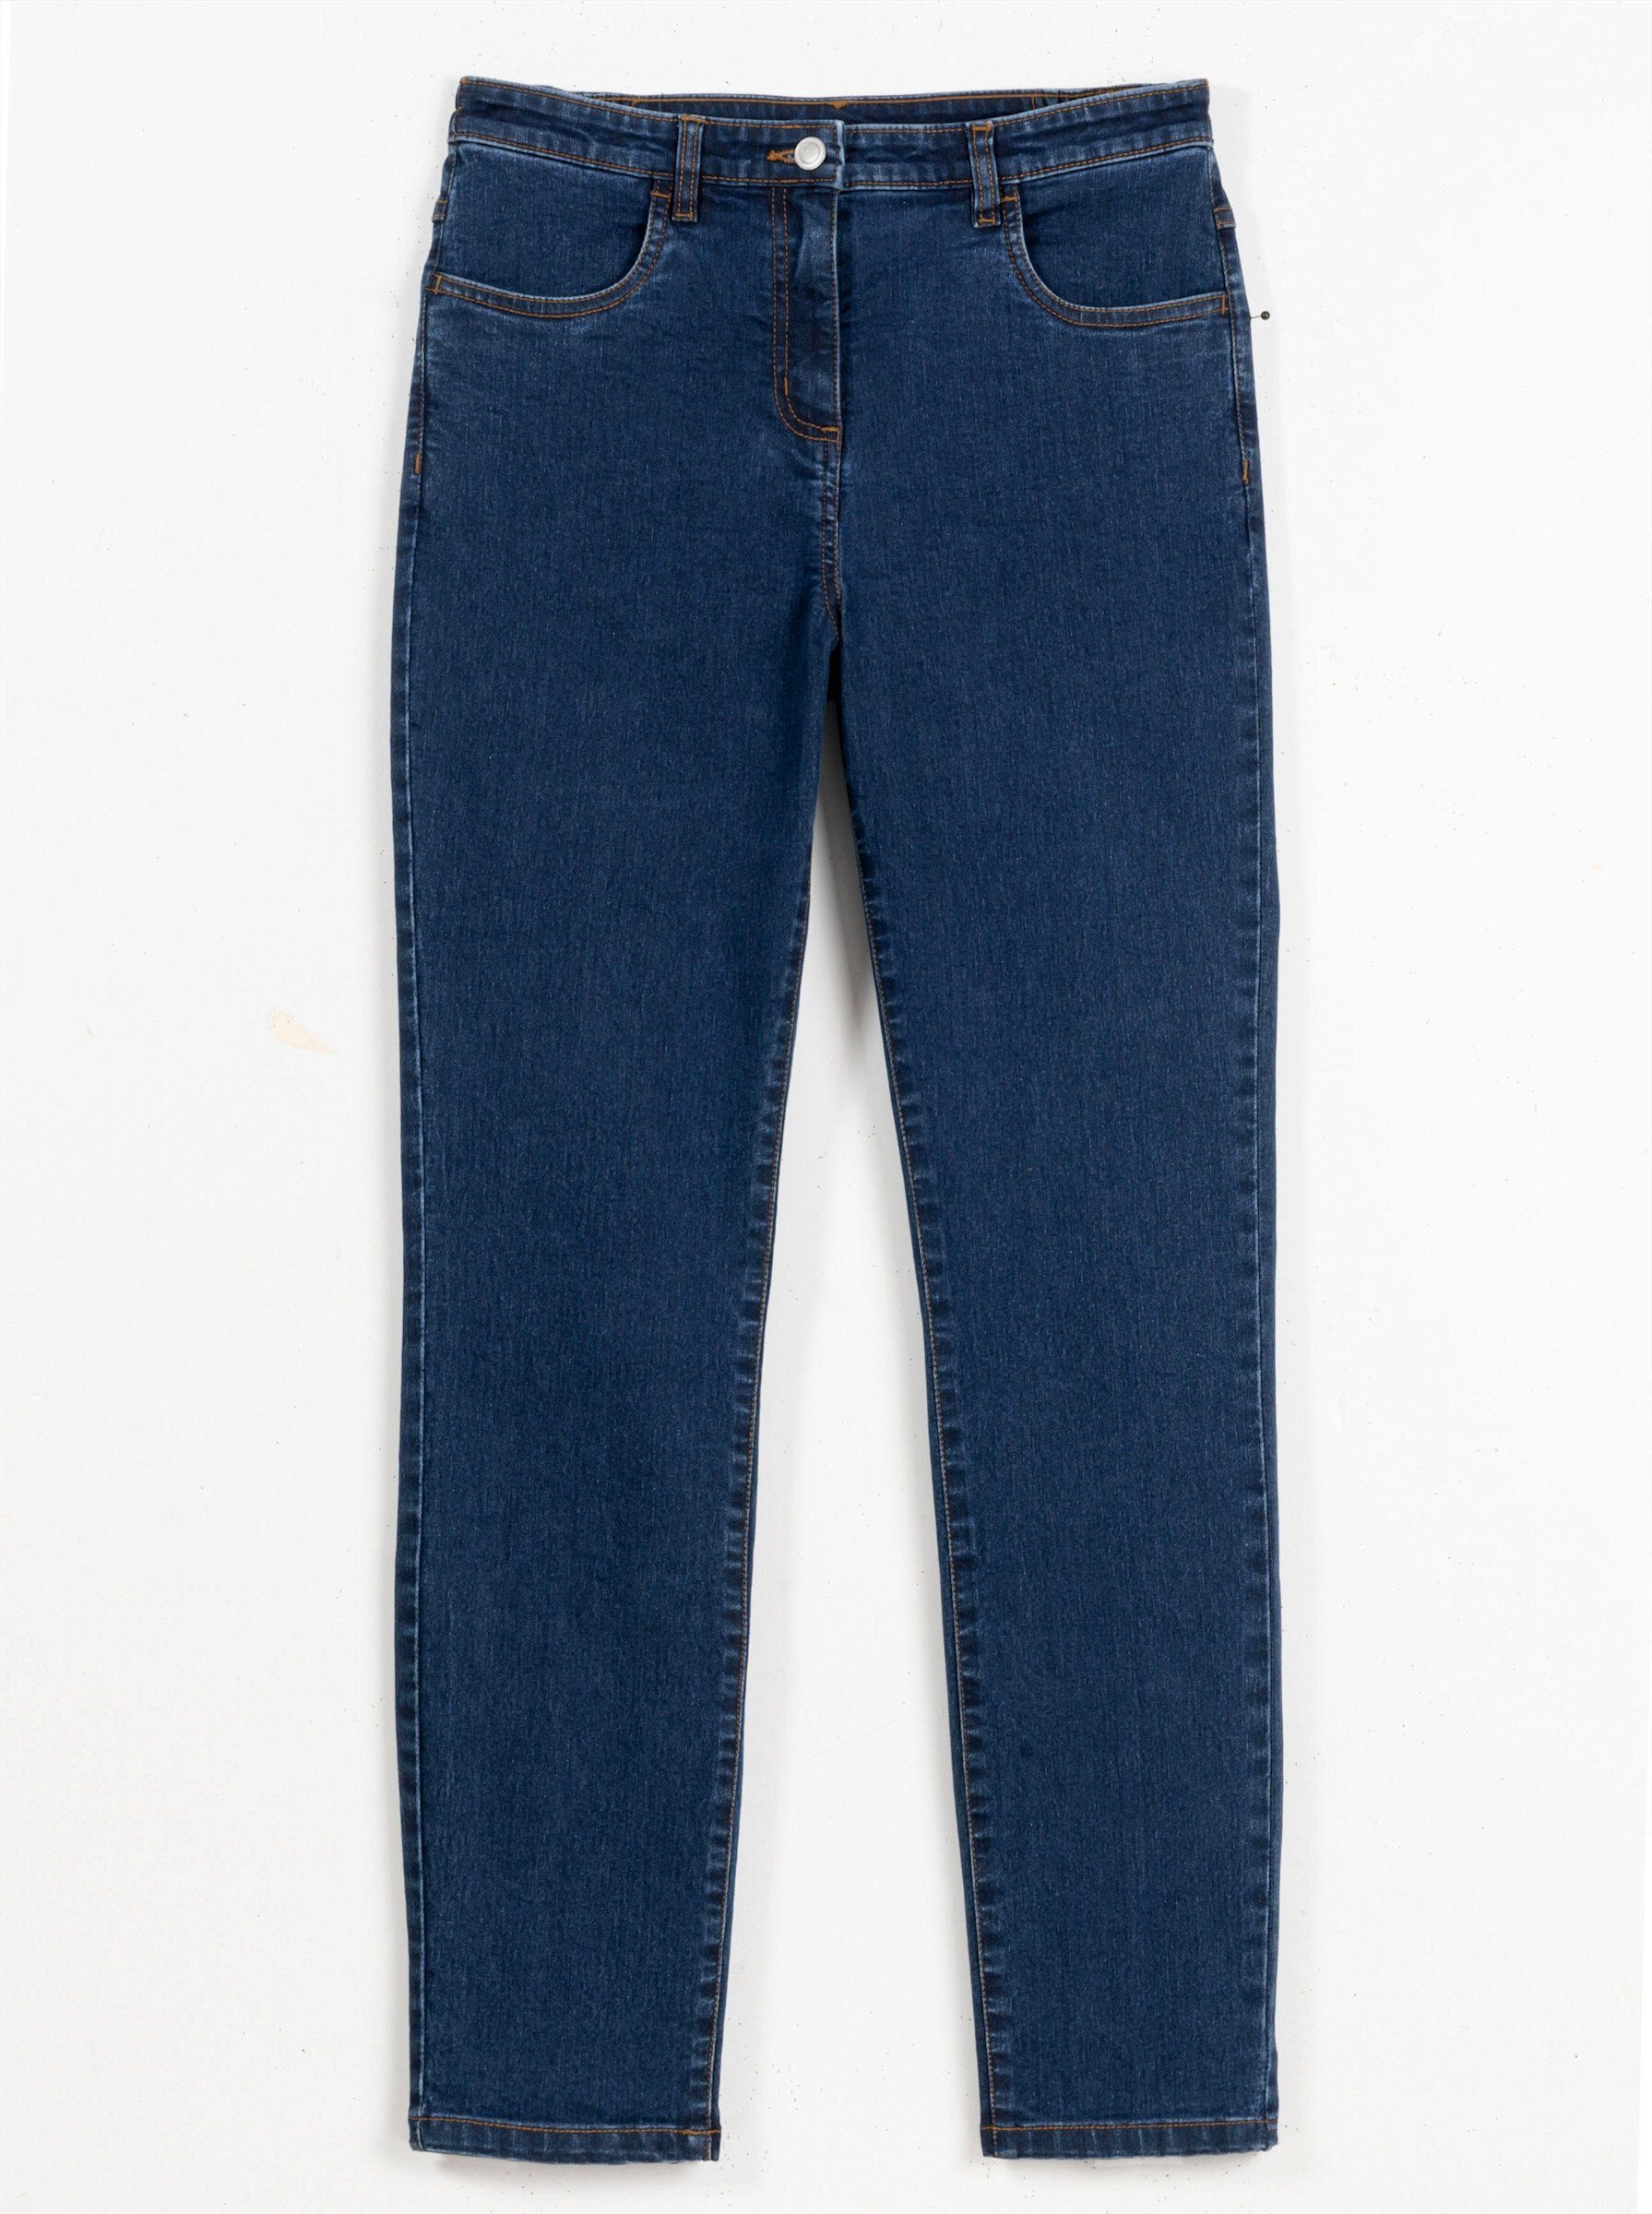 Sieh Jeans blue-stone-washed Bequeme an!